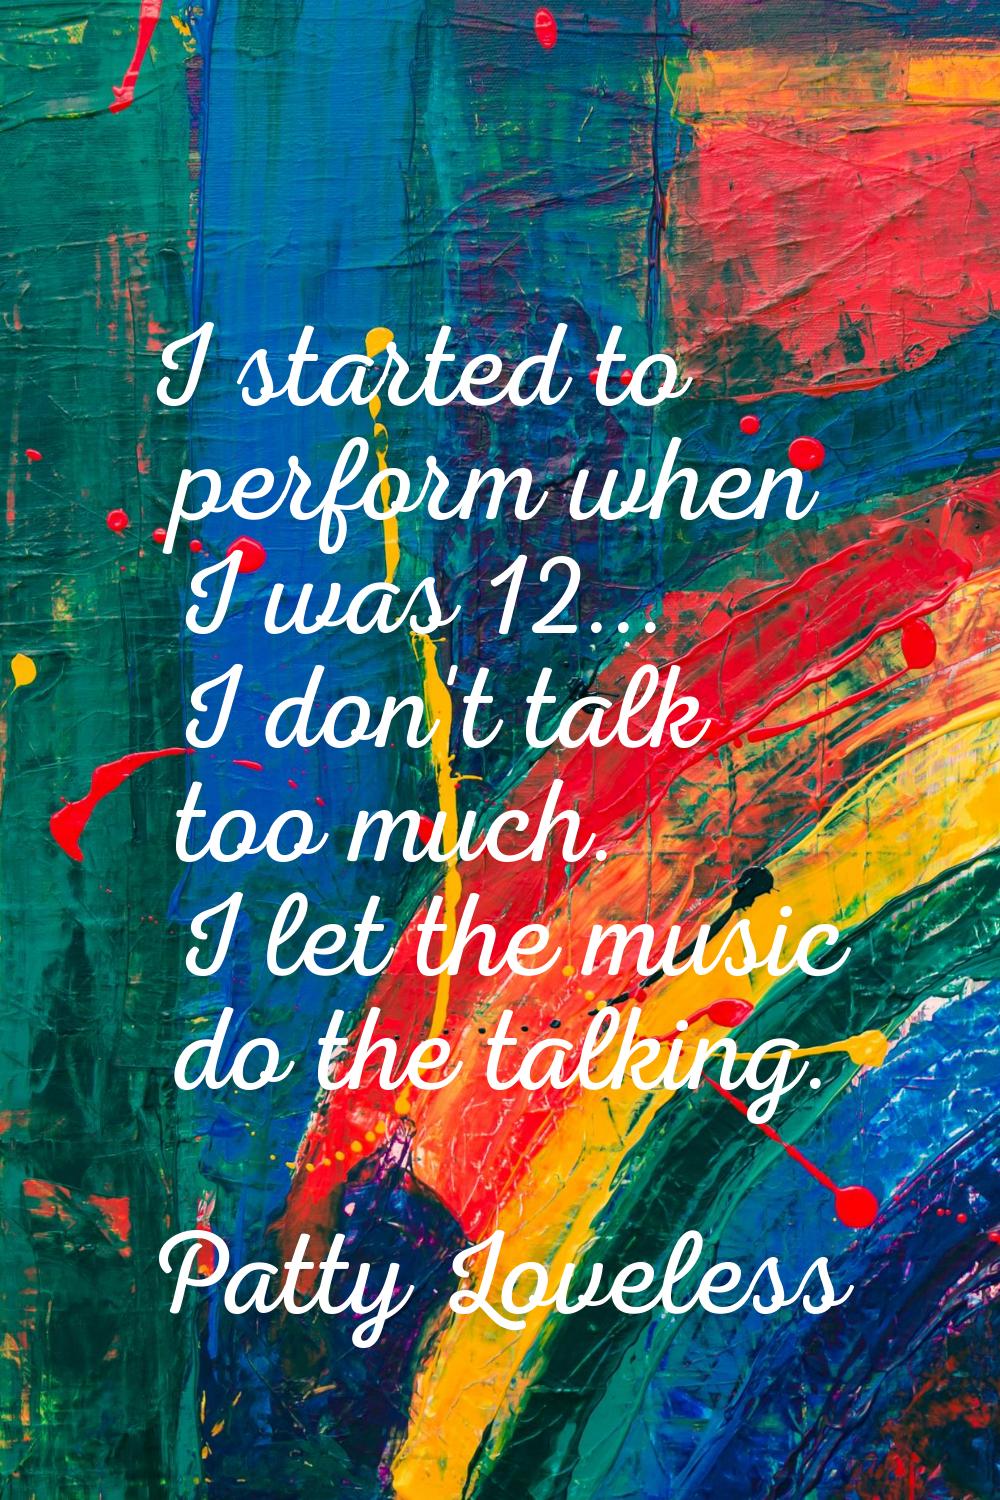 I started to perform when I was 12... I don't talk too much. I let the music do the talking.